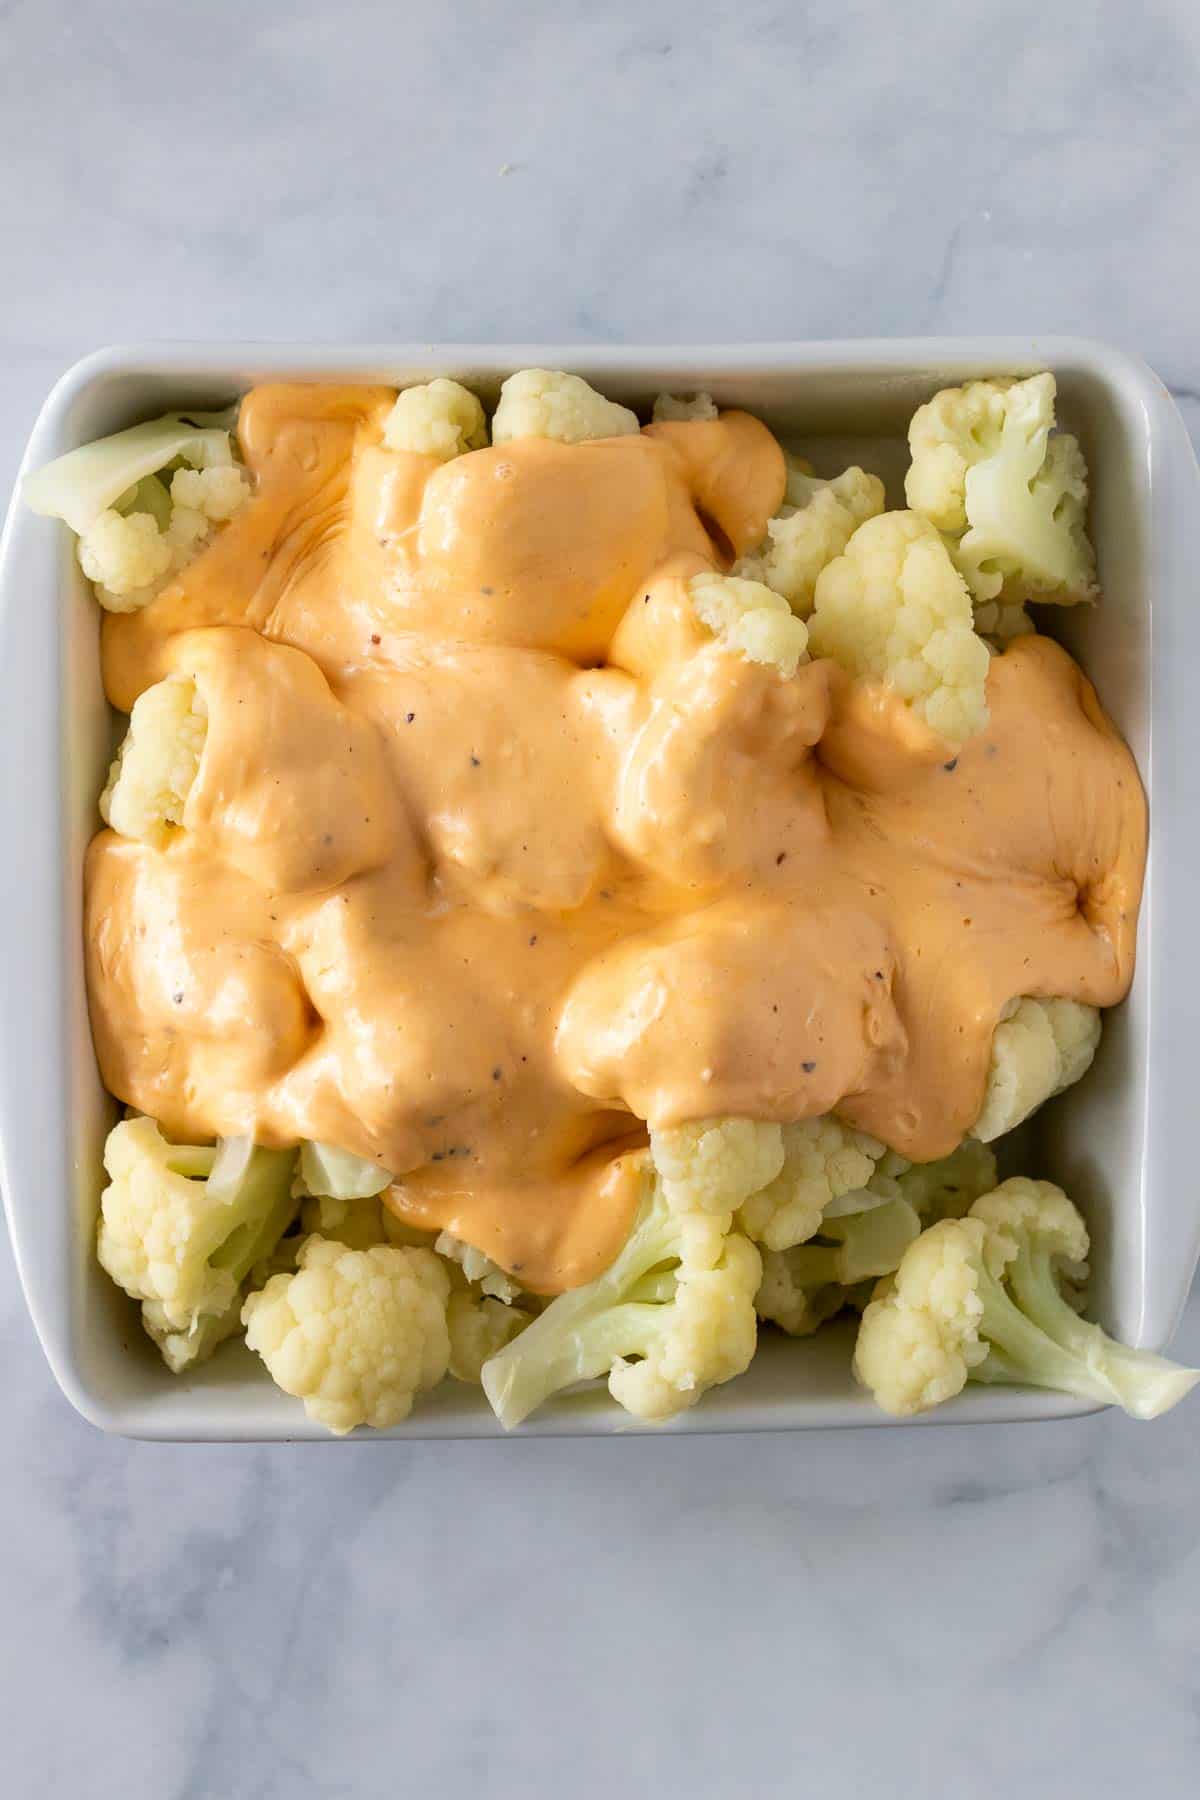 Cheese sauce poured over cauliflower in an 8x8 baking dish